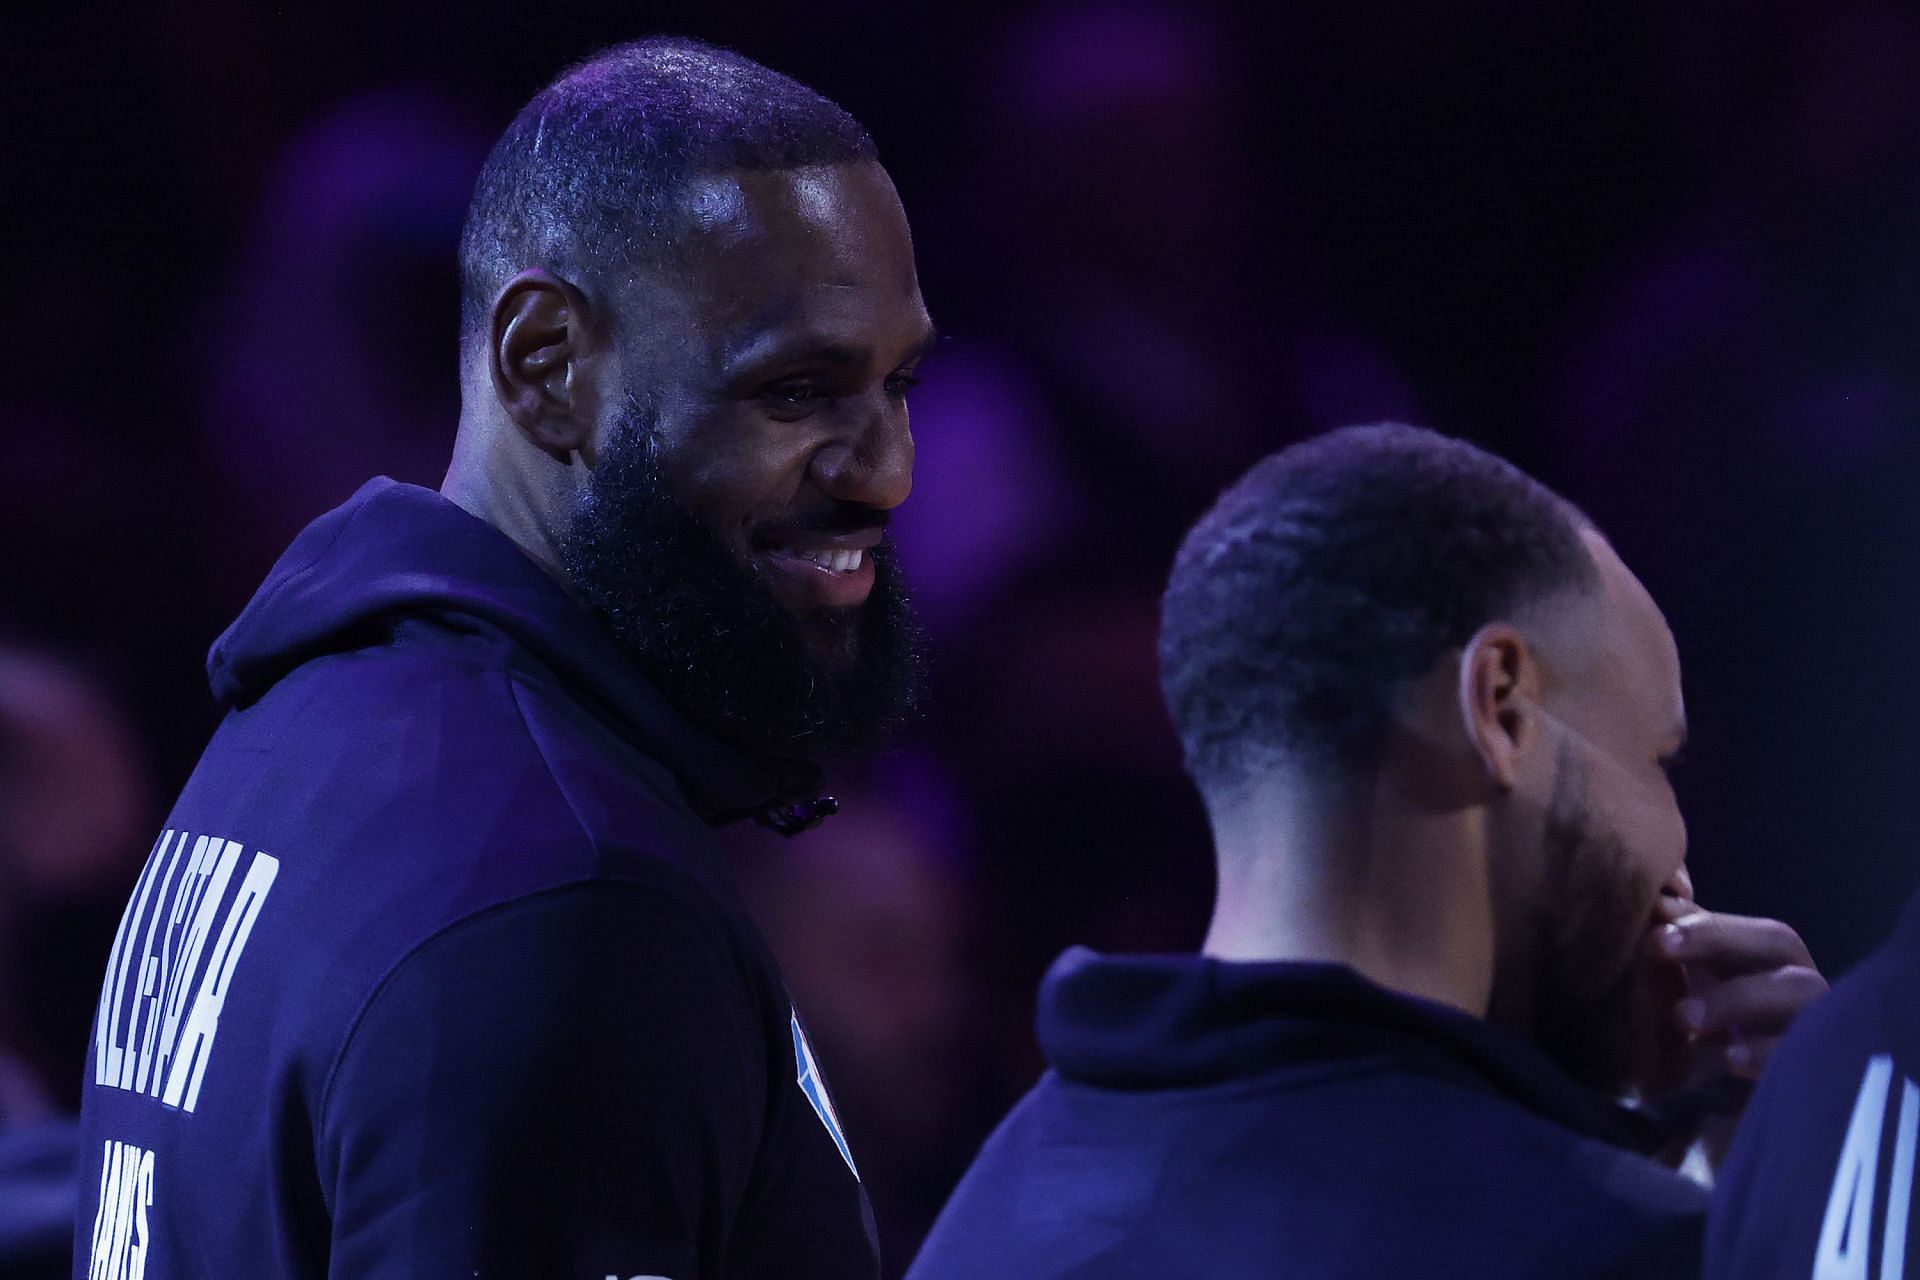 Steph Curry was a part of Team LeBron at the 2022 NBA All-Star Game